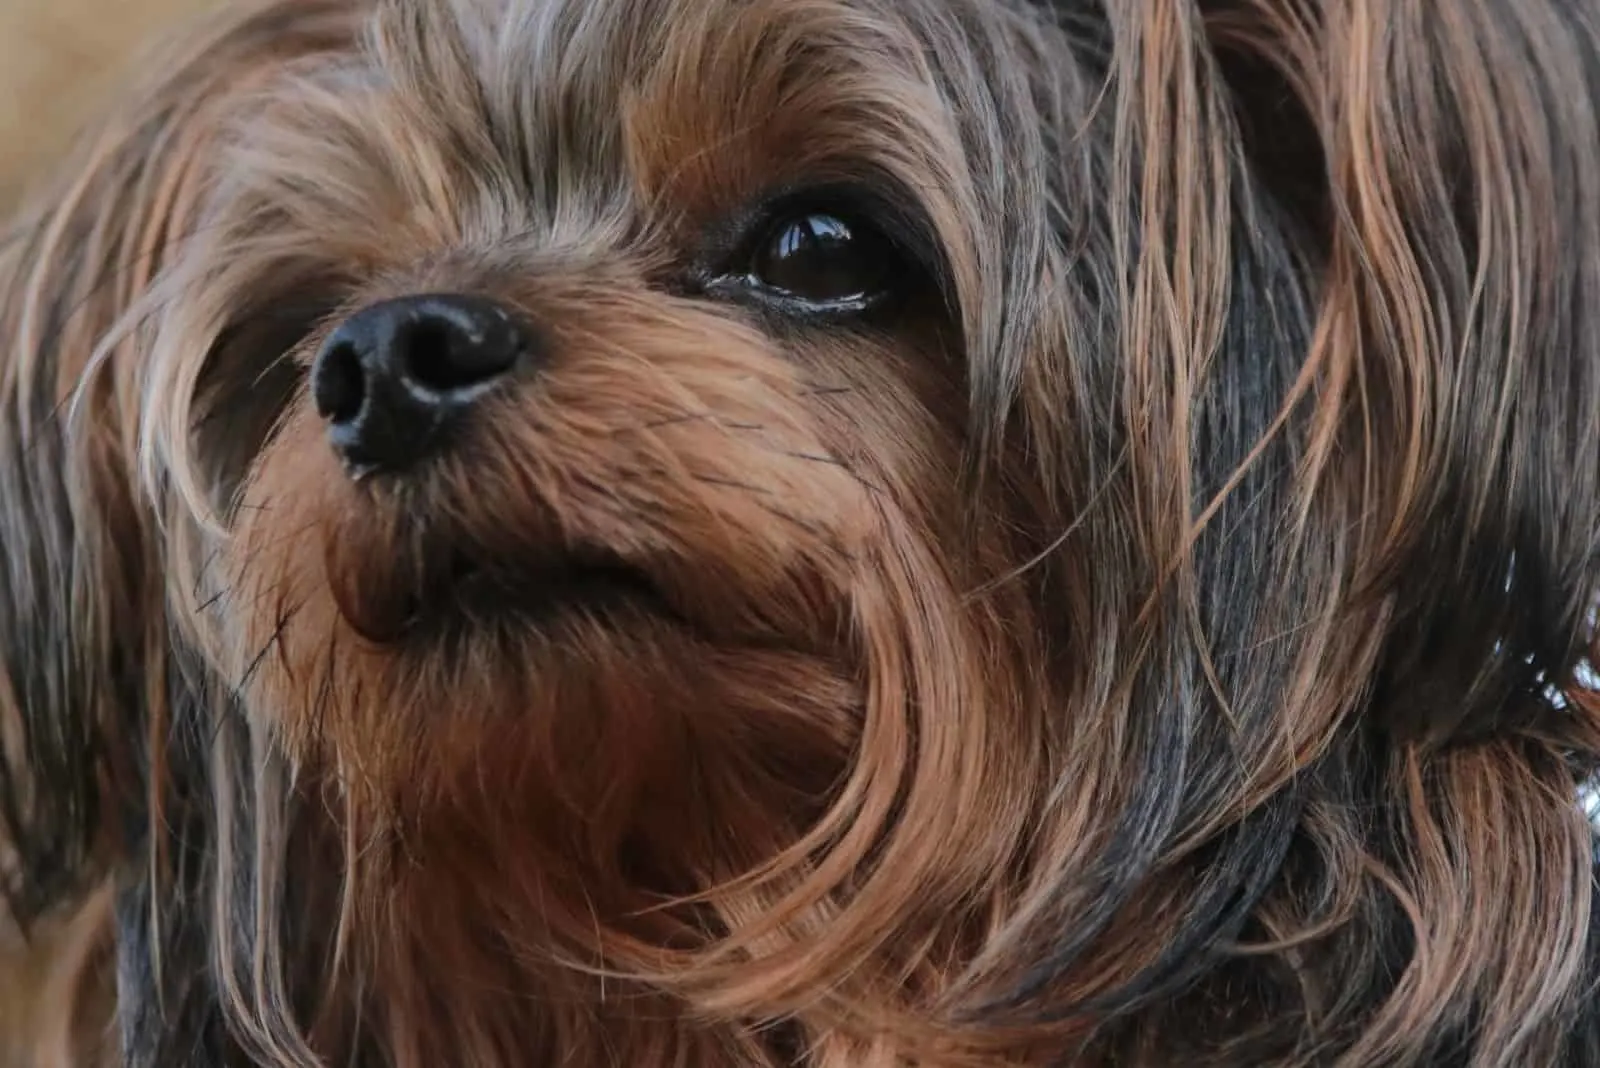 yorkie poo puppy looking away in a close up image